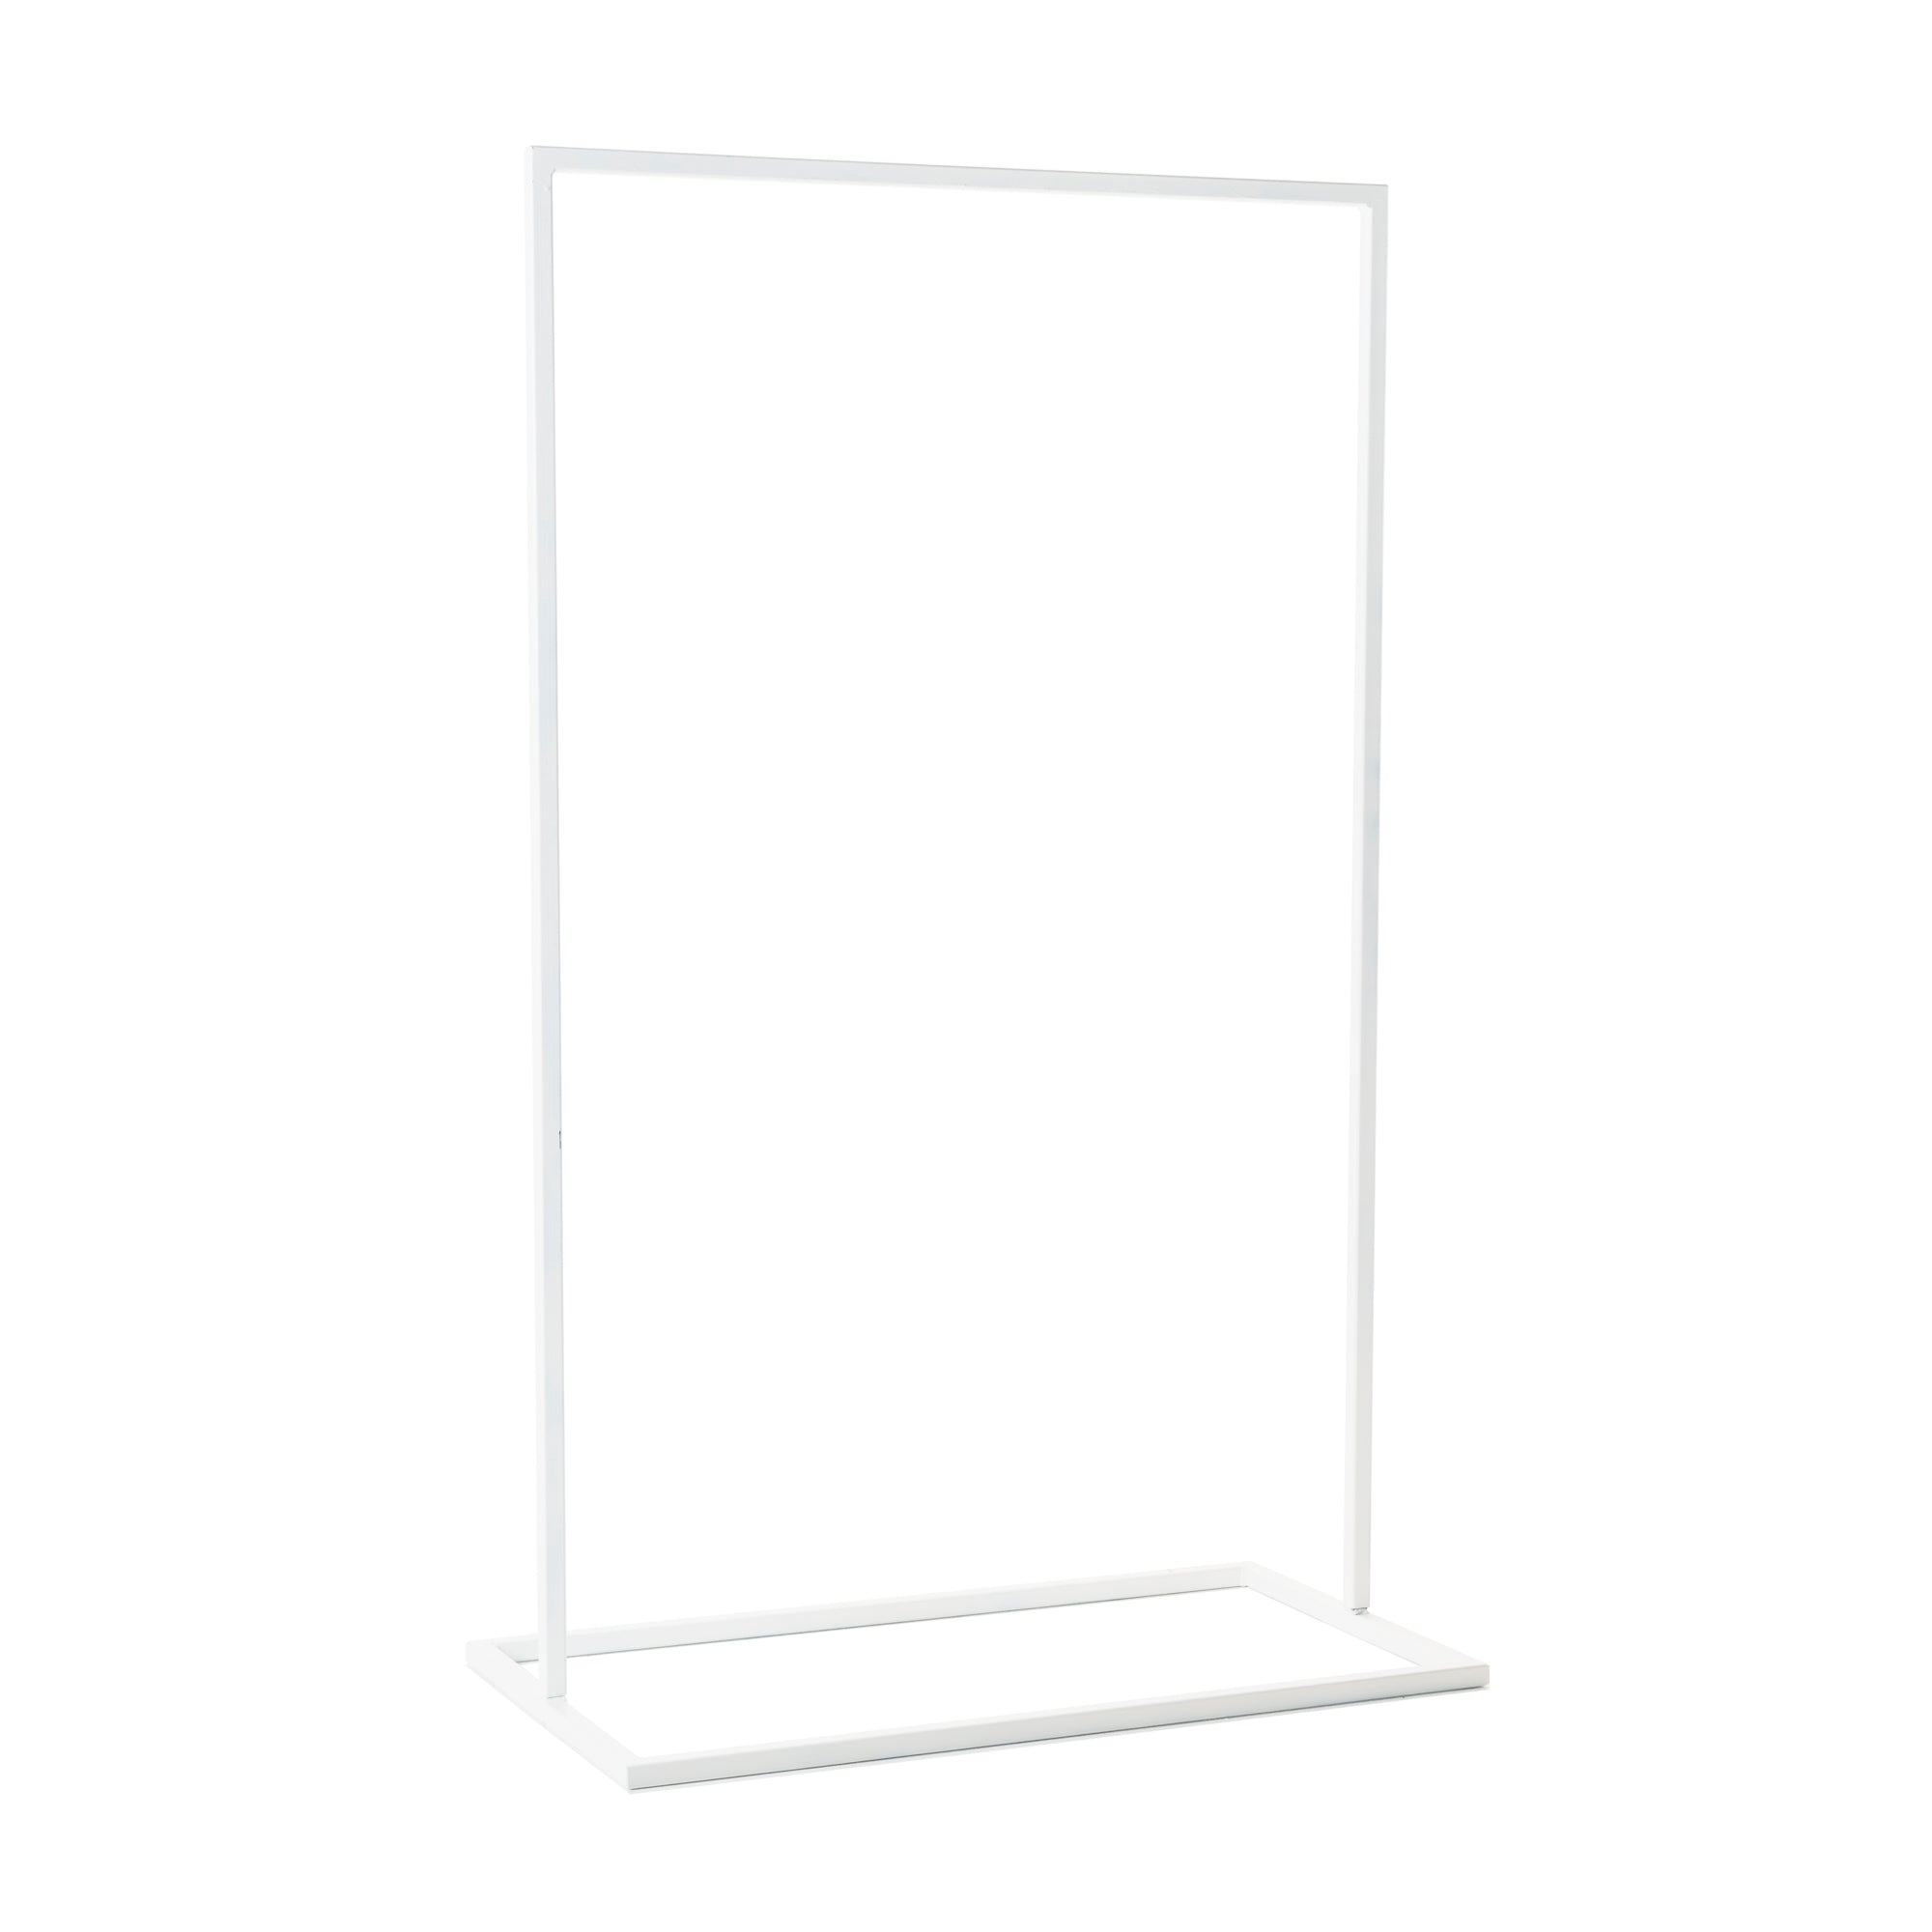 White metal frame for hire - Wedding signage - Gold Coast Wedding & Event Hire